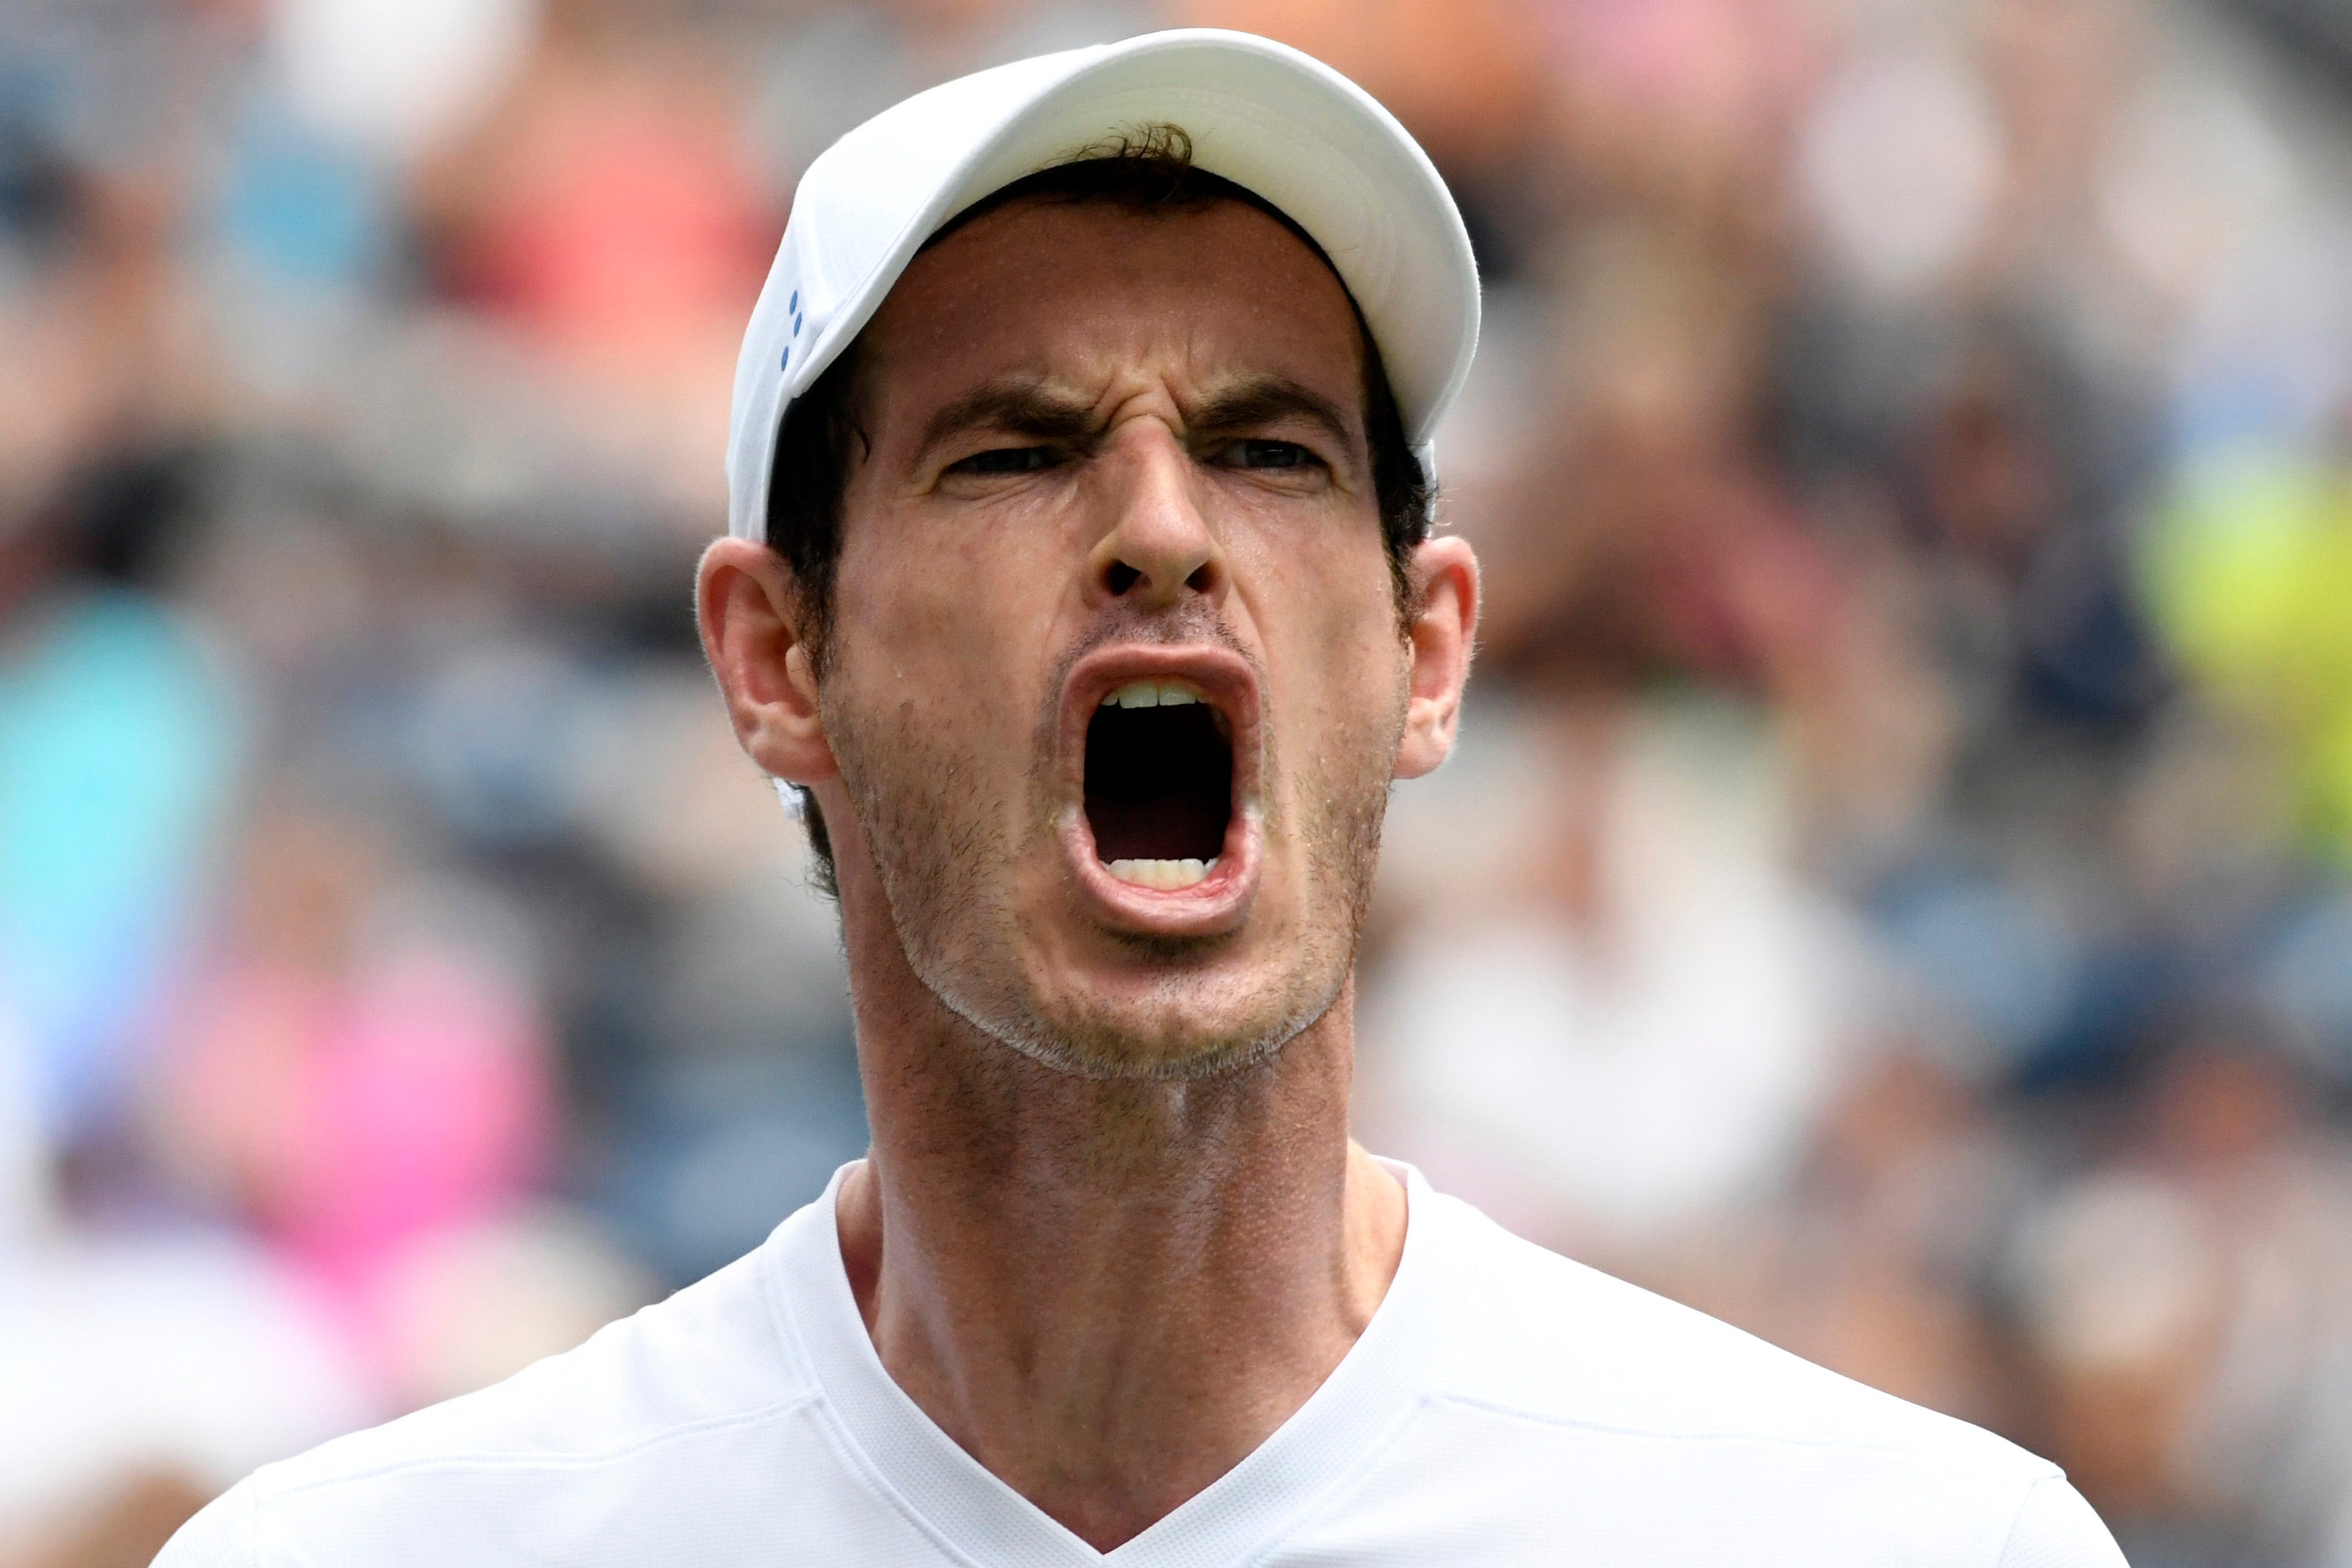 Andy Murray of Great Britain reacts during his match on day one of the 2018 U.S. Open tennis tournament at USTA Billie Jean King National Tennis Center in New York.